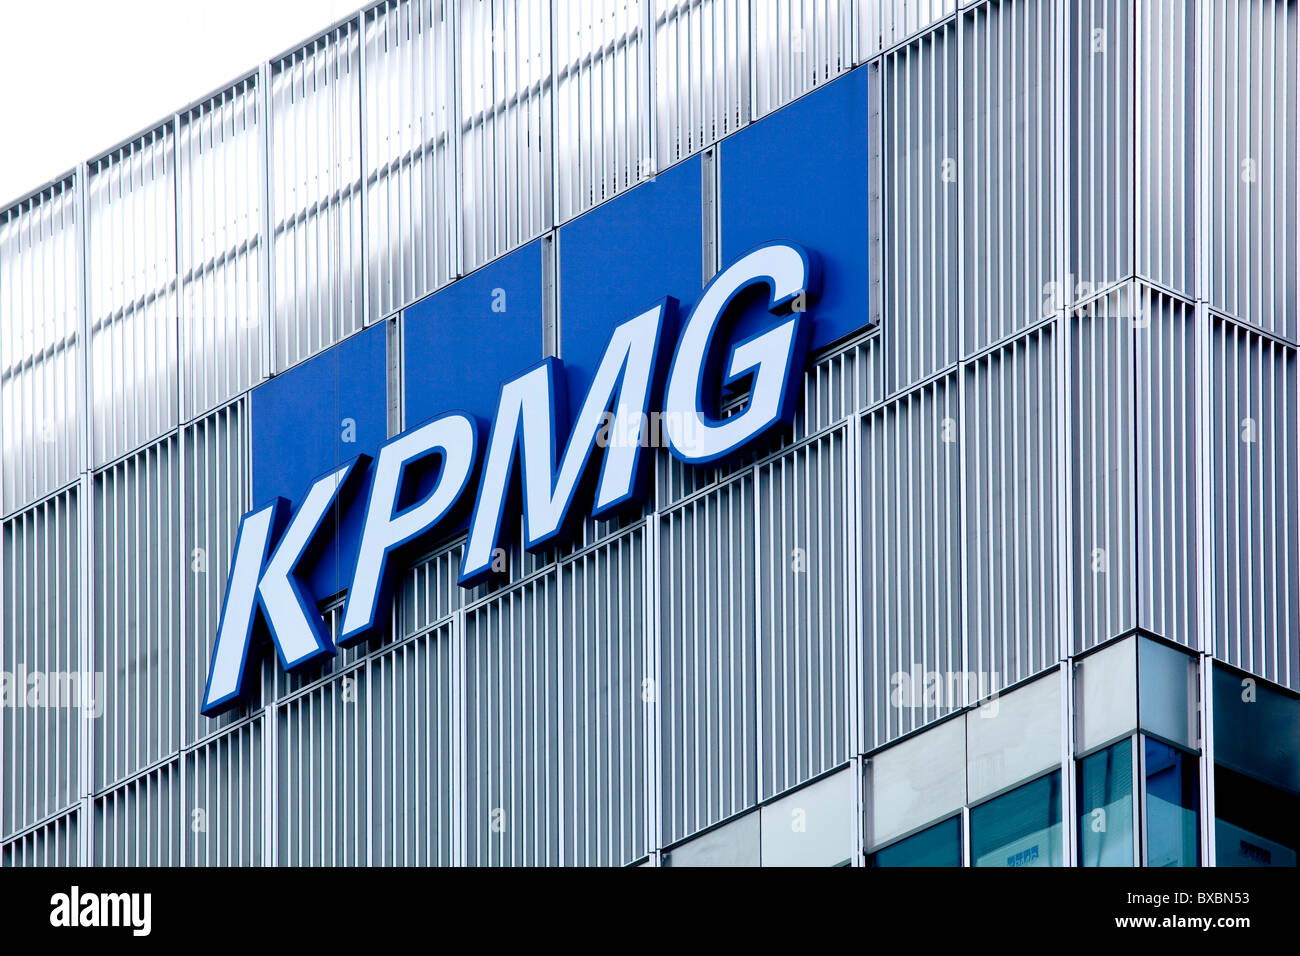 Why CBN’s decision on MPR my prevent Banks from giving credit--KPMG